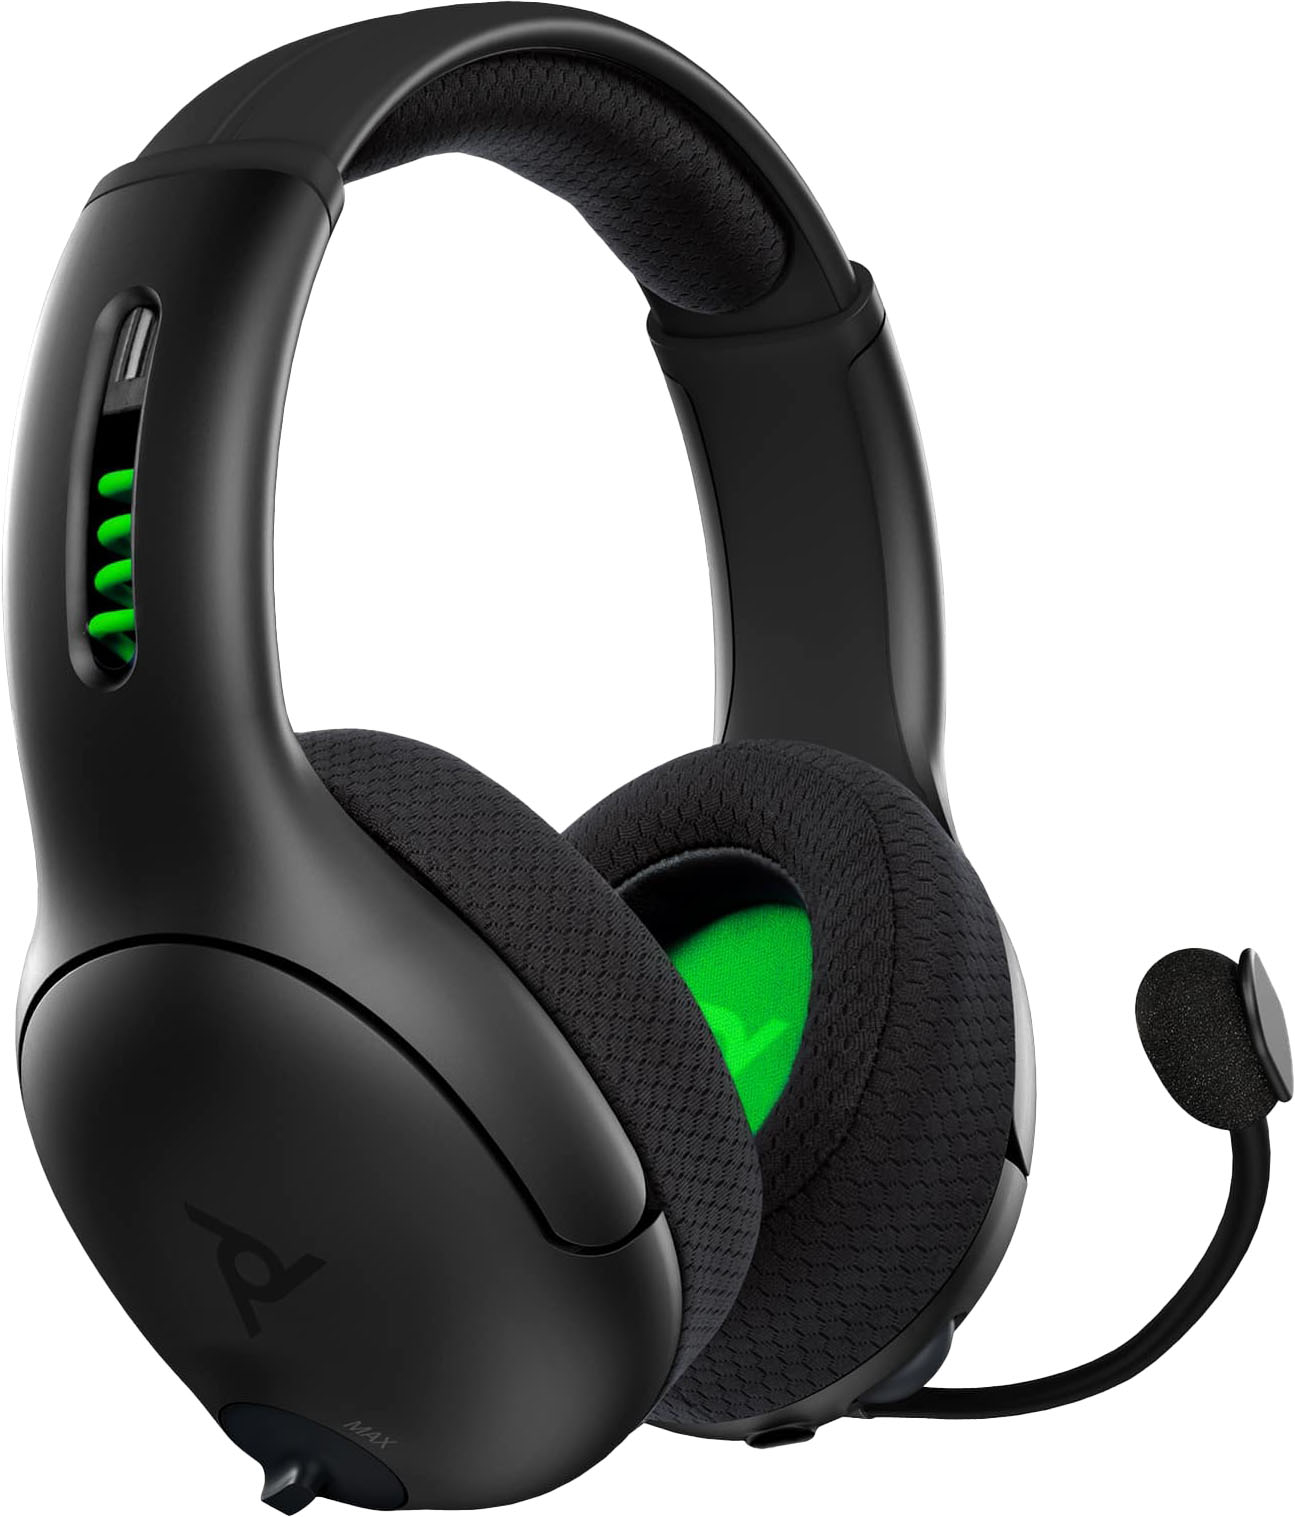 PDP LVL50 Wireless Stereo Headset for Xbox One 708056064563